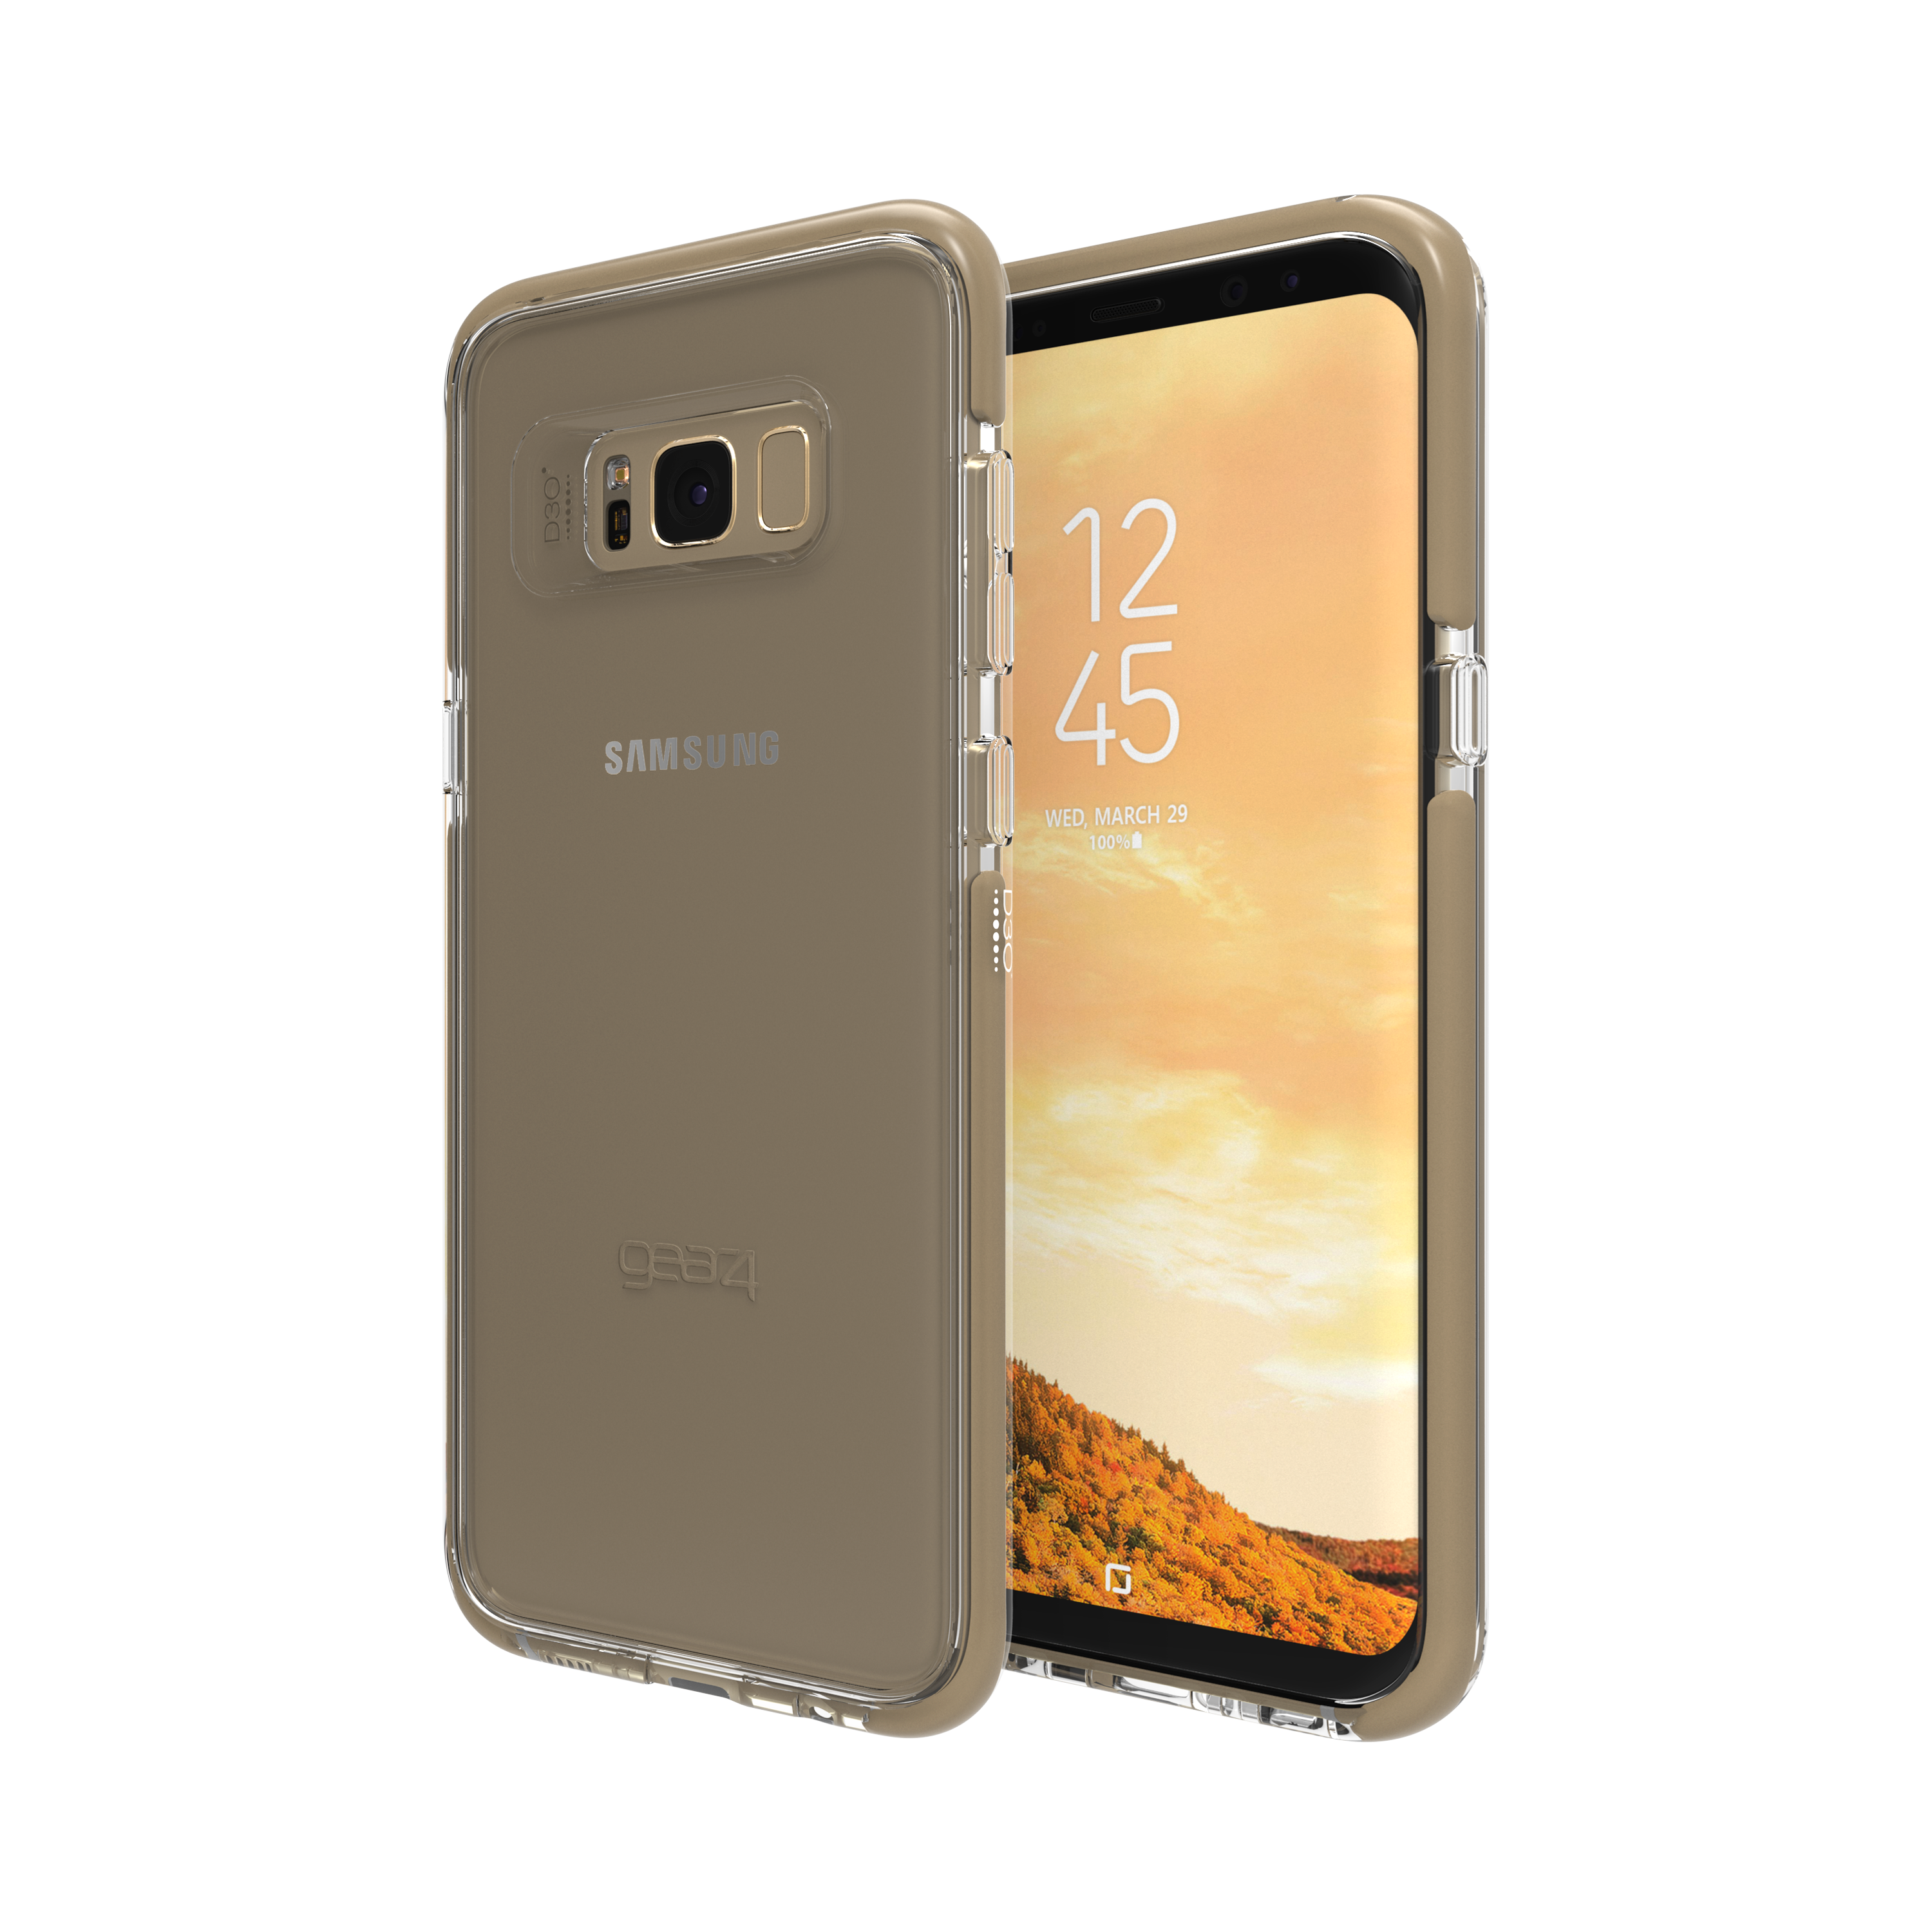 GEAR4 Backcover, GOLD GALAXY Piccadilly, S8+, SAMSUNG,